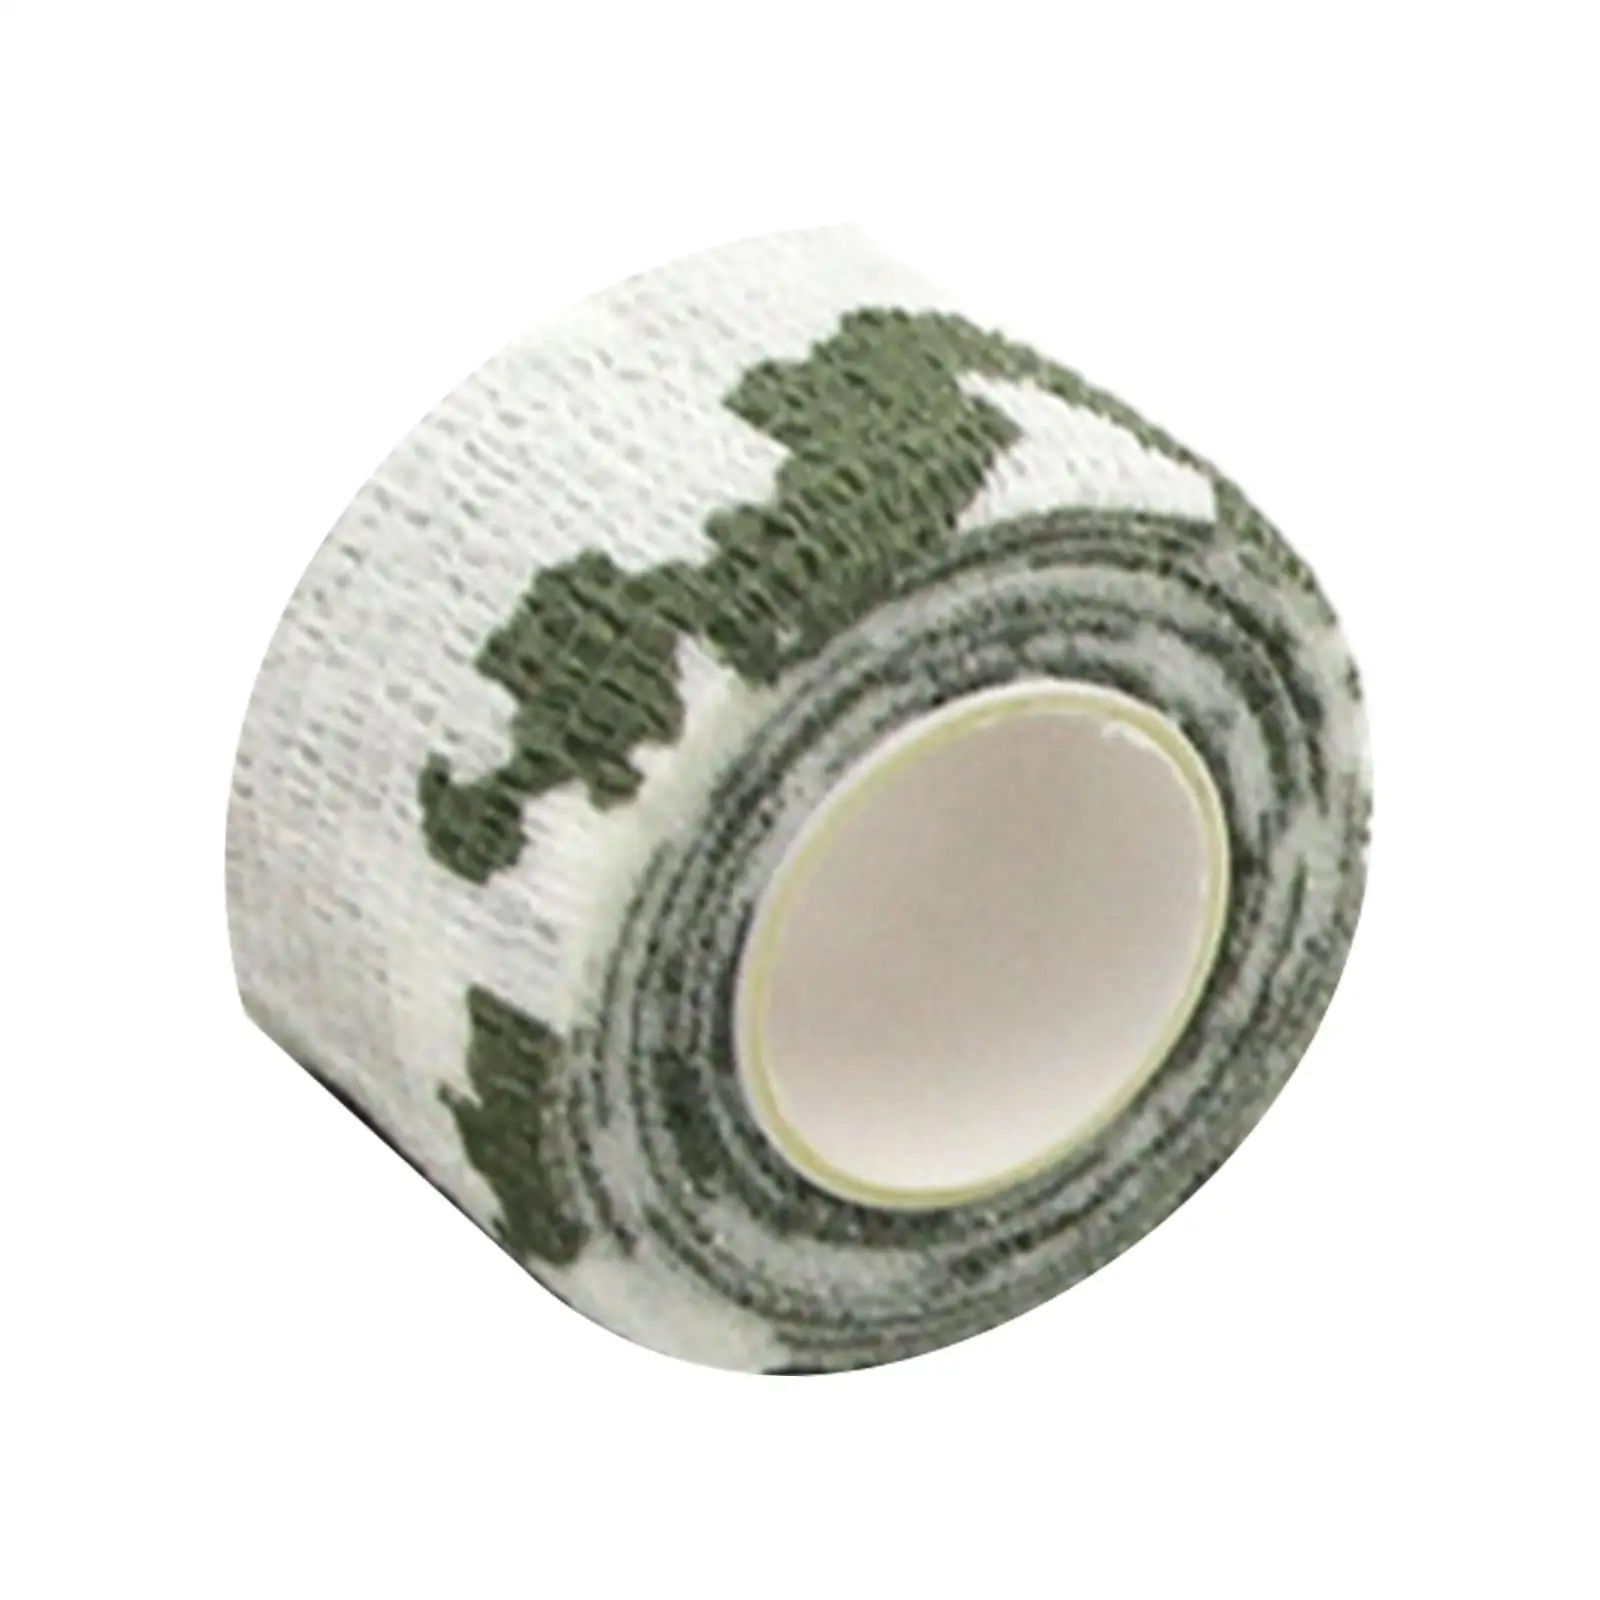 Cohesive Wrap Reusable Elastic Wrap for Fingers Wrist Ankle Emergency Supplies Camping Ice and Snow Outdoor Activities